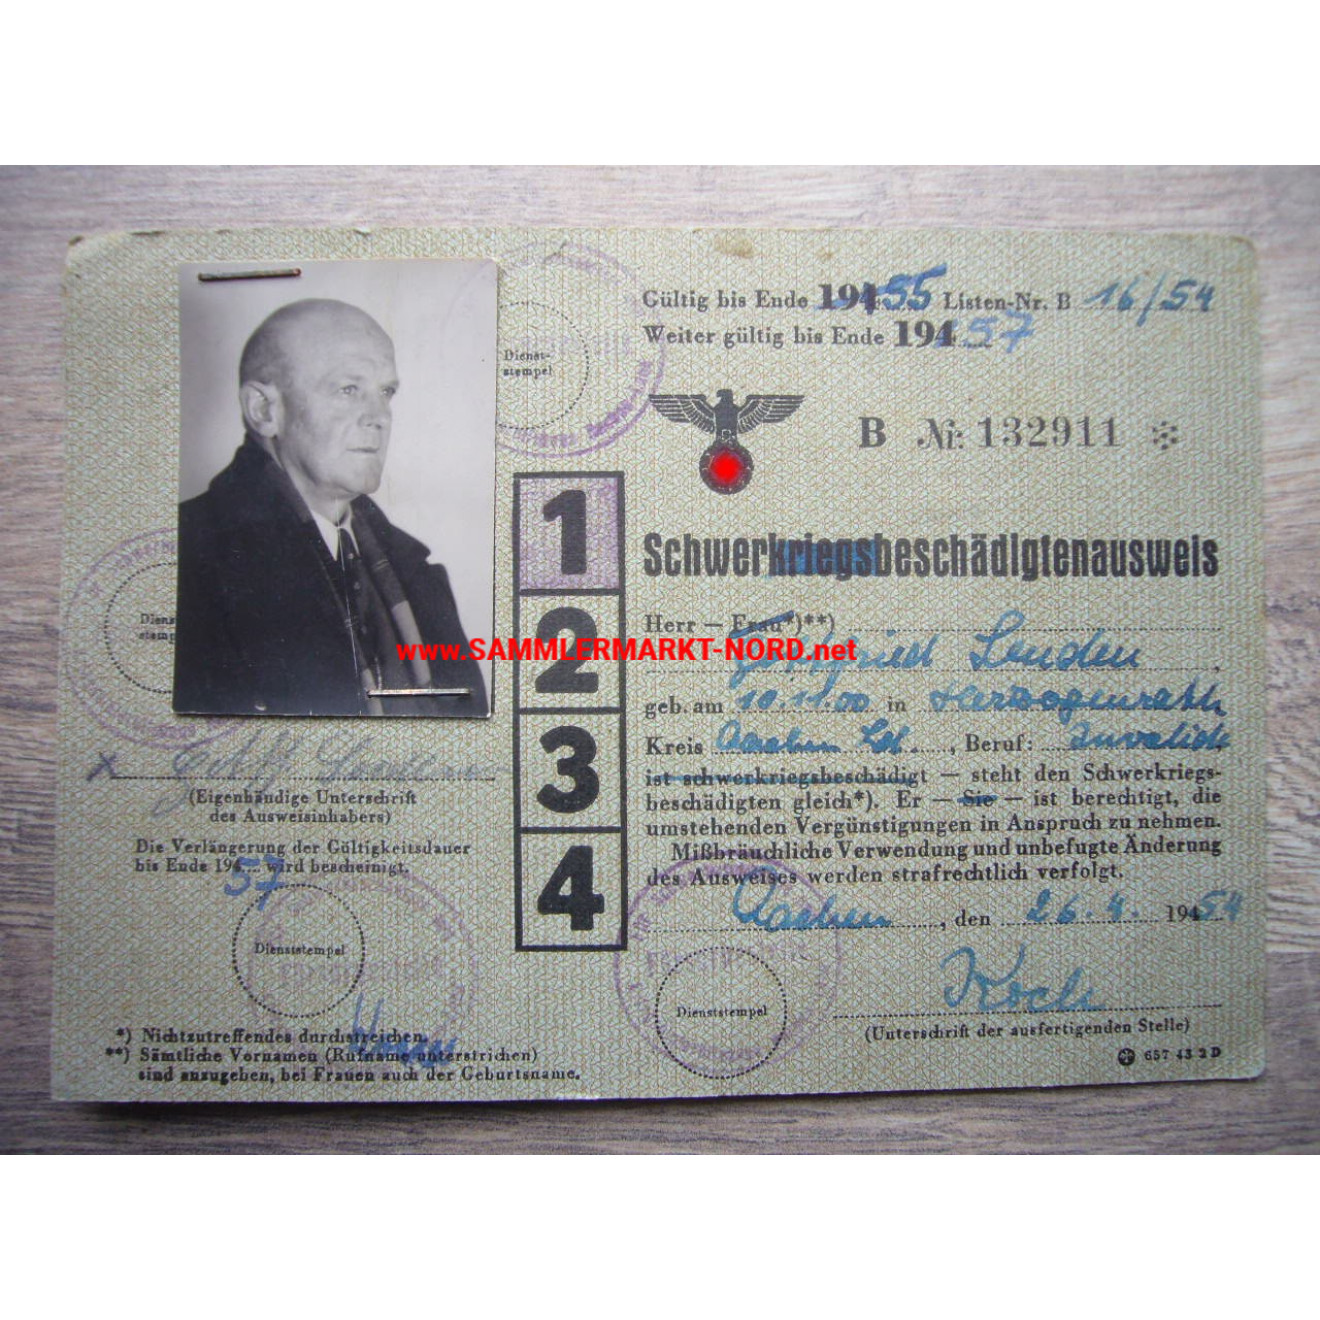 Severely disabled ID card 1954 - form from the 3rd Reich